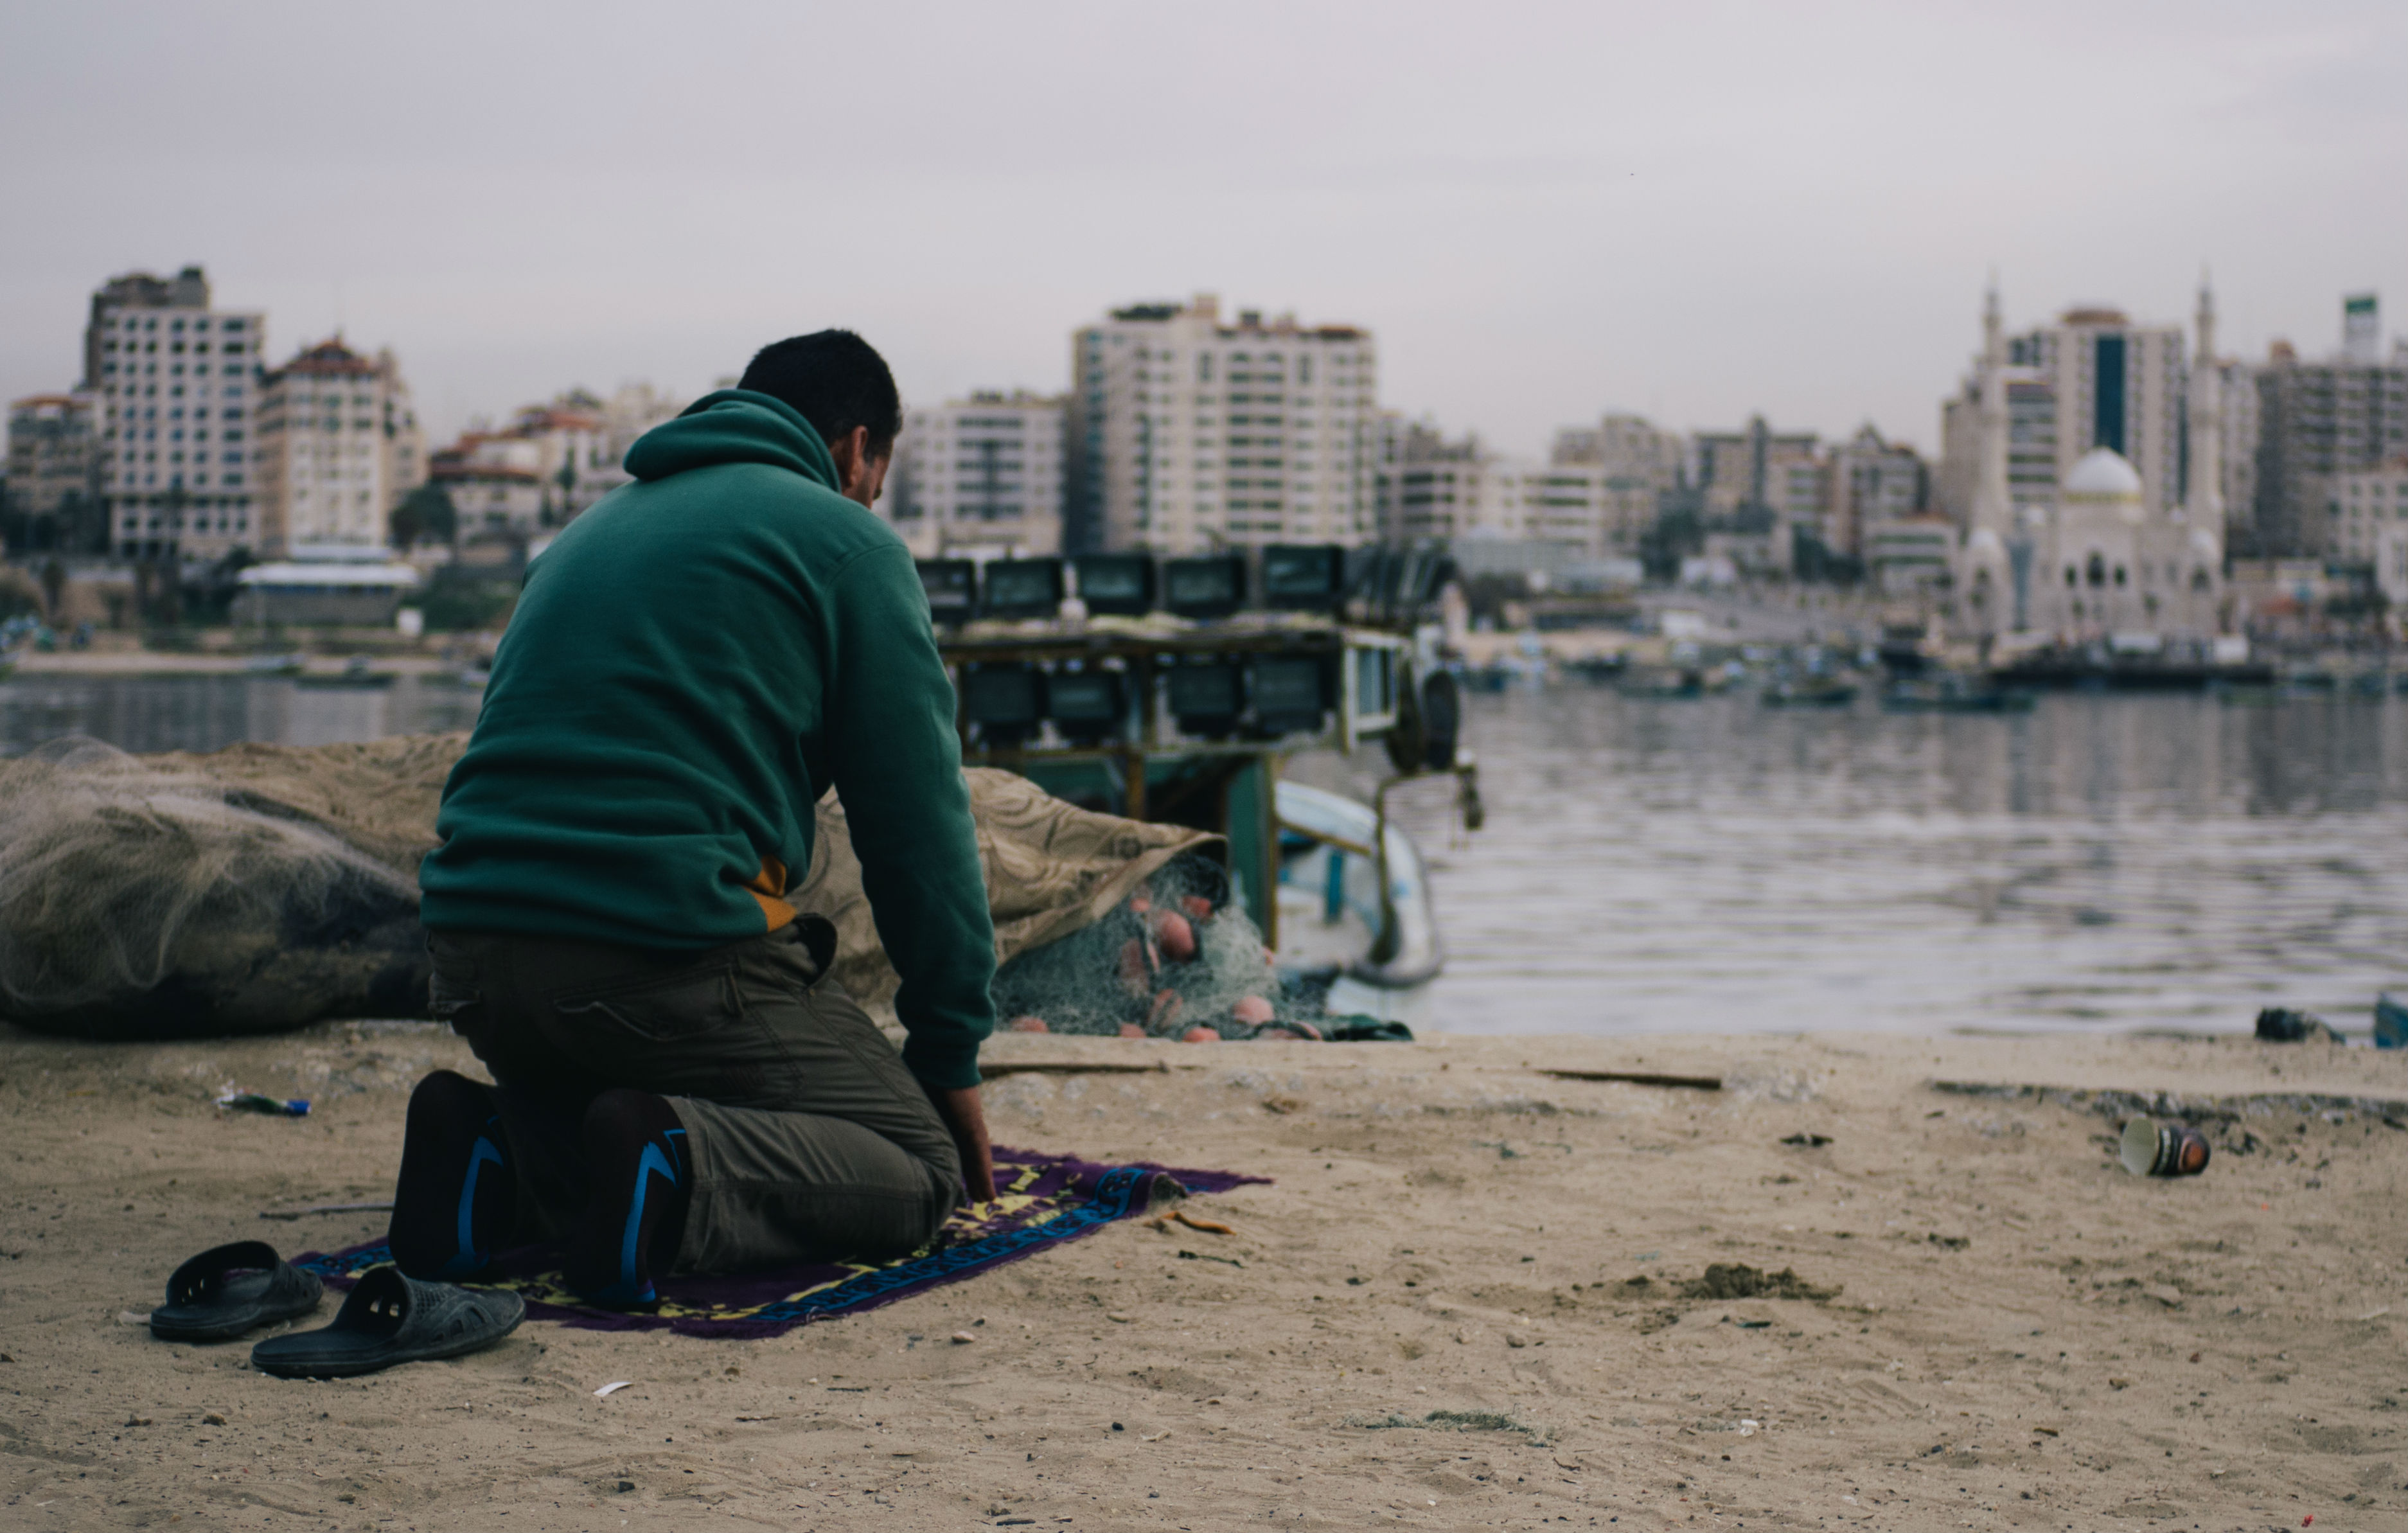 A resident at prayer. As Gaza increasingly struggles with power shortages and political stagnation in recent years, so the sea has become an emotional, physical and mental crutch. 